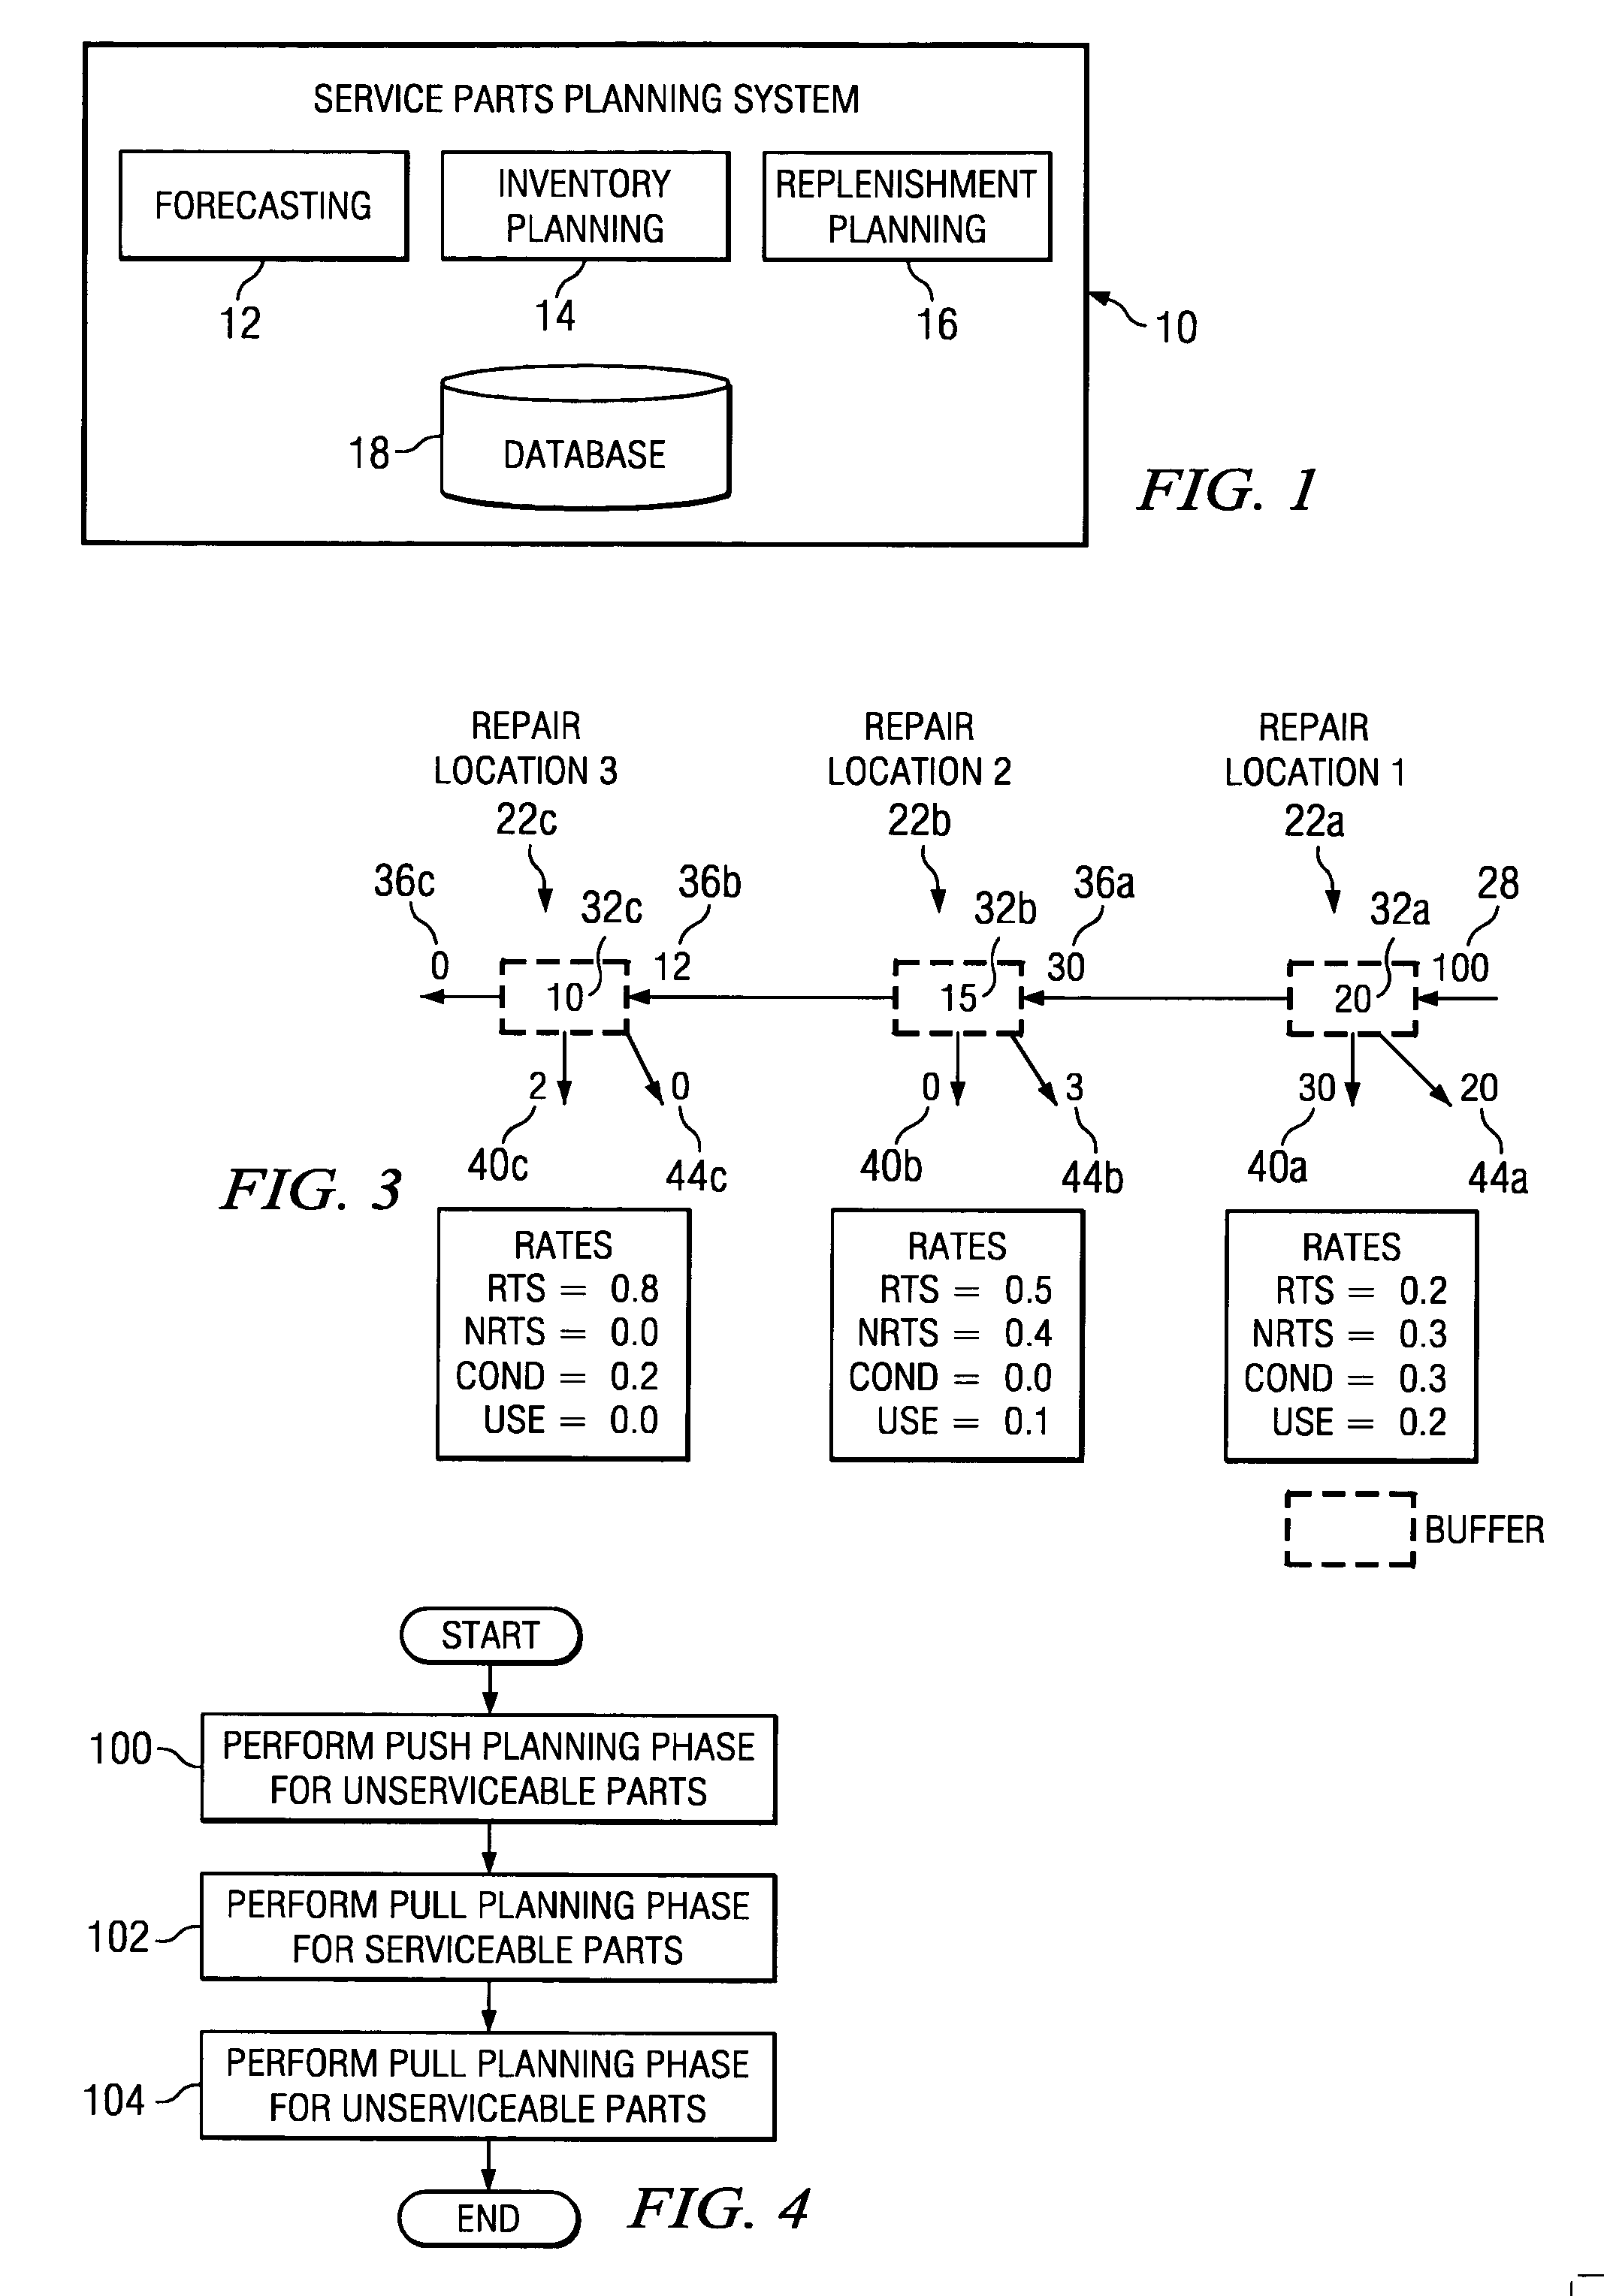 Pull planning for unserviceable parts in connection with on-demand repair planning